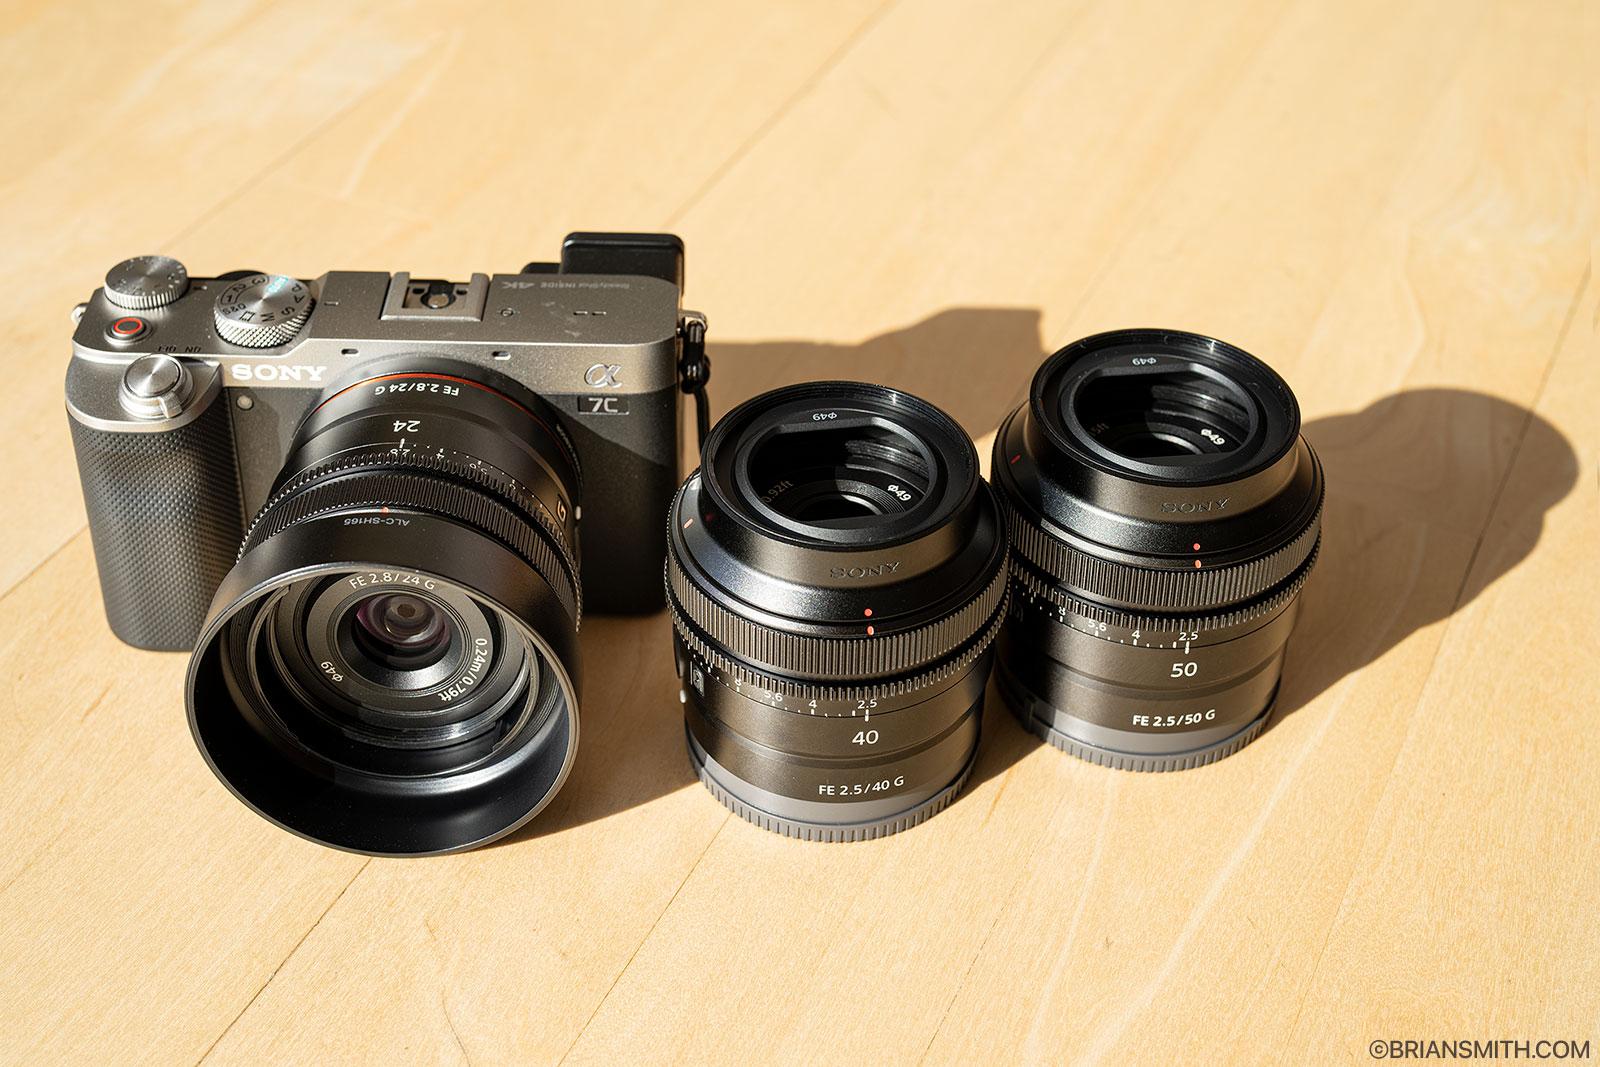 Sony 24mm f/2.8, 40mm f/2.5, and 50mm f/2.5 Review: Tiny But Mighty